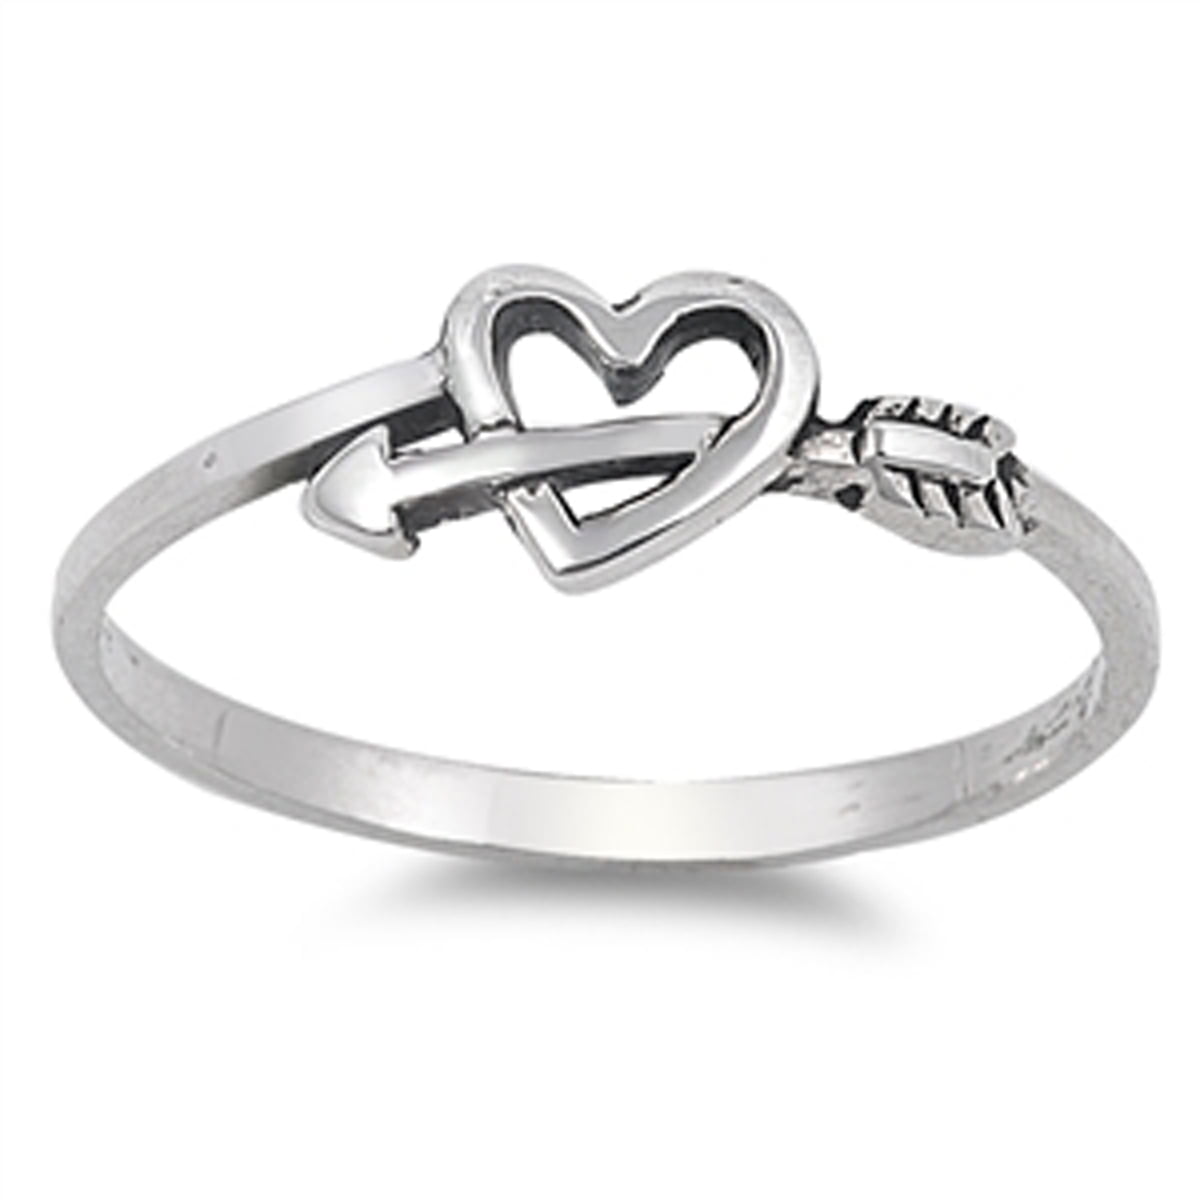 Sterling Silver 925 HEART WITH ARROW DESIGN SILVER BAND RING 9MM SIZES 4-10 